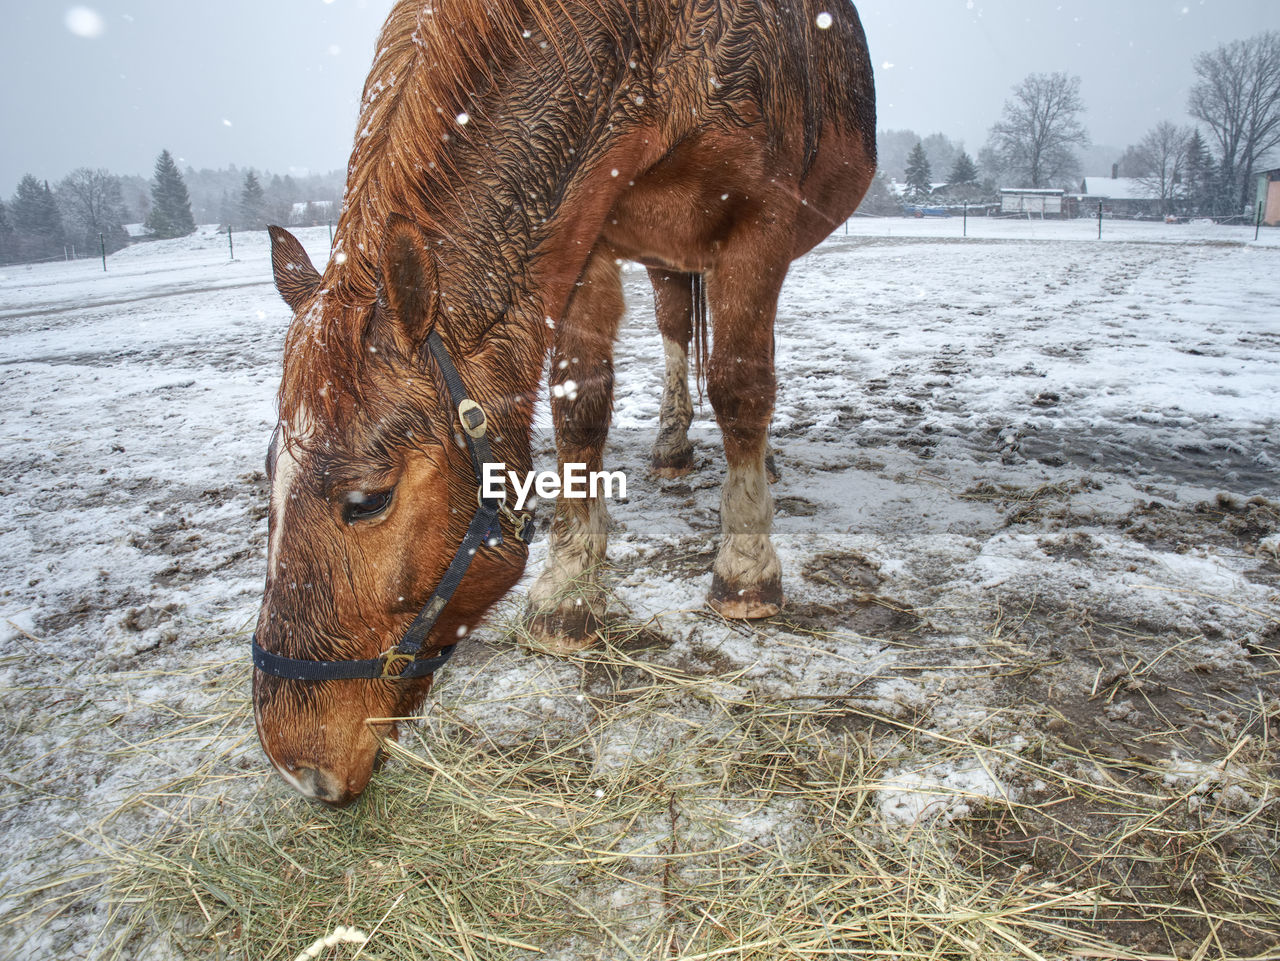 Brown horse in falling snow with close face and eyes.horse in winter. nice western horse with snow